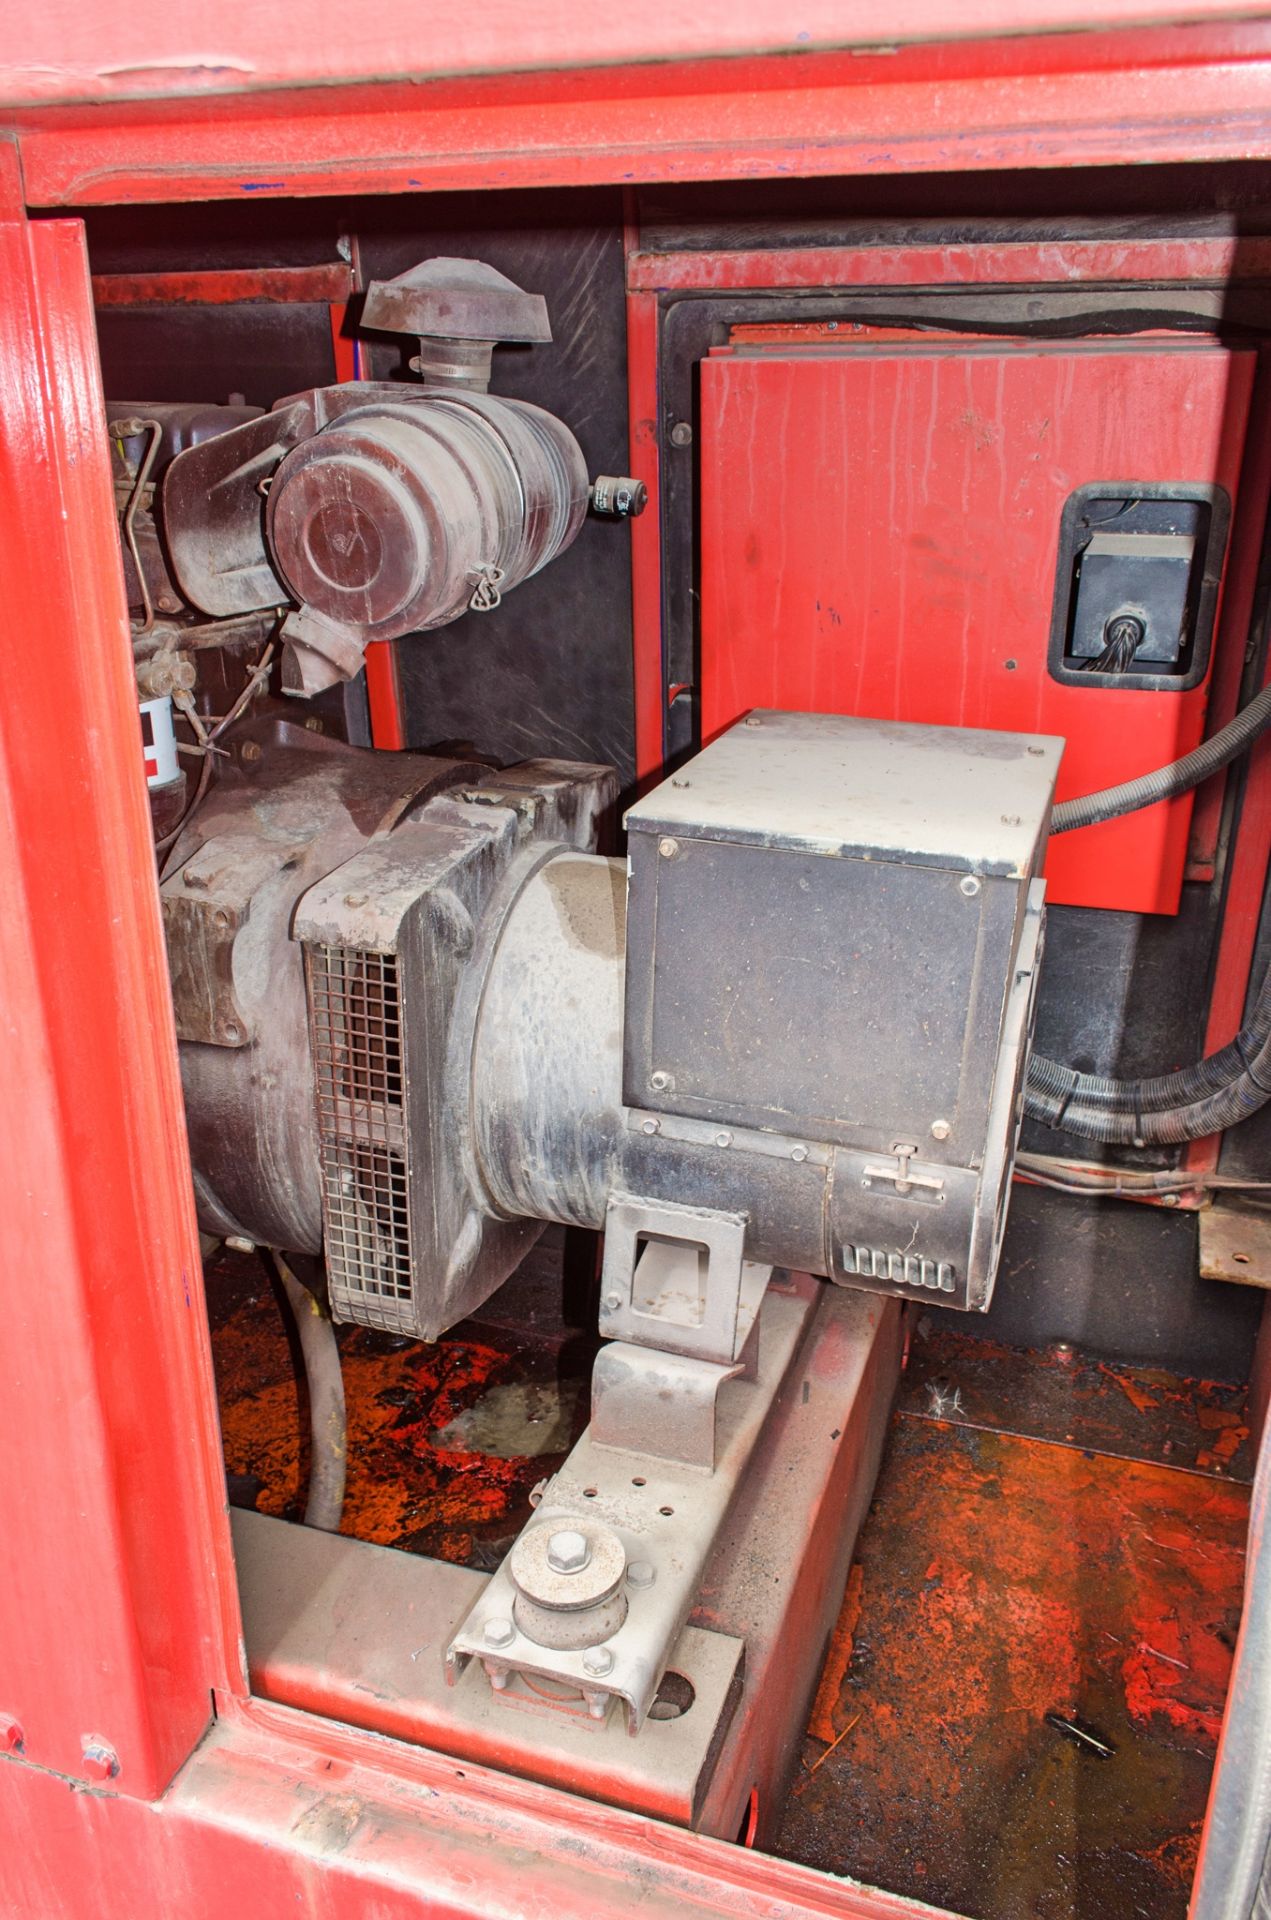 SMC G30 30 kva diesel driven generator S/N: G30092263 Recorded Hours: 8389 - Image 8 of 9